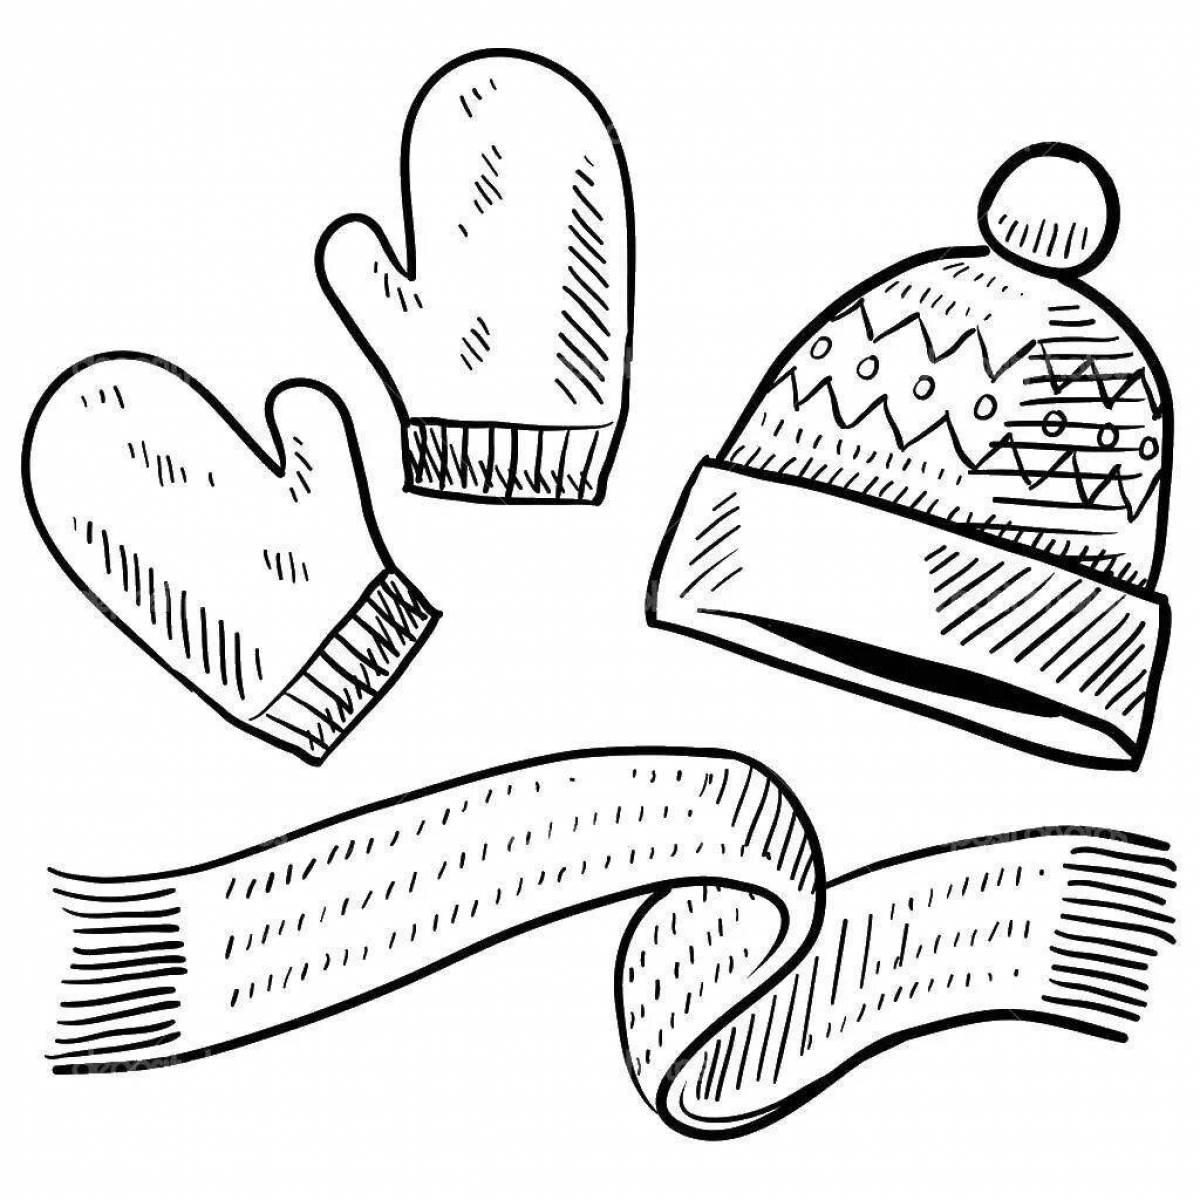 Adorable coloring book of mittens and hat for babies